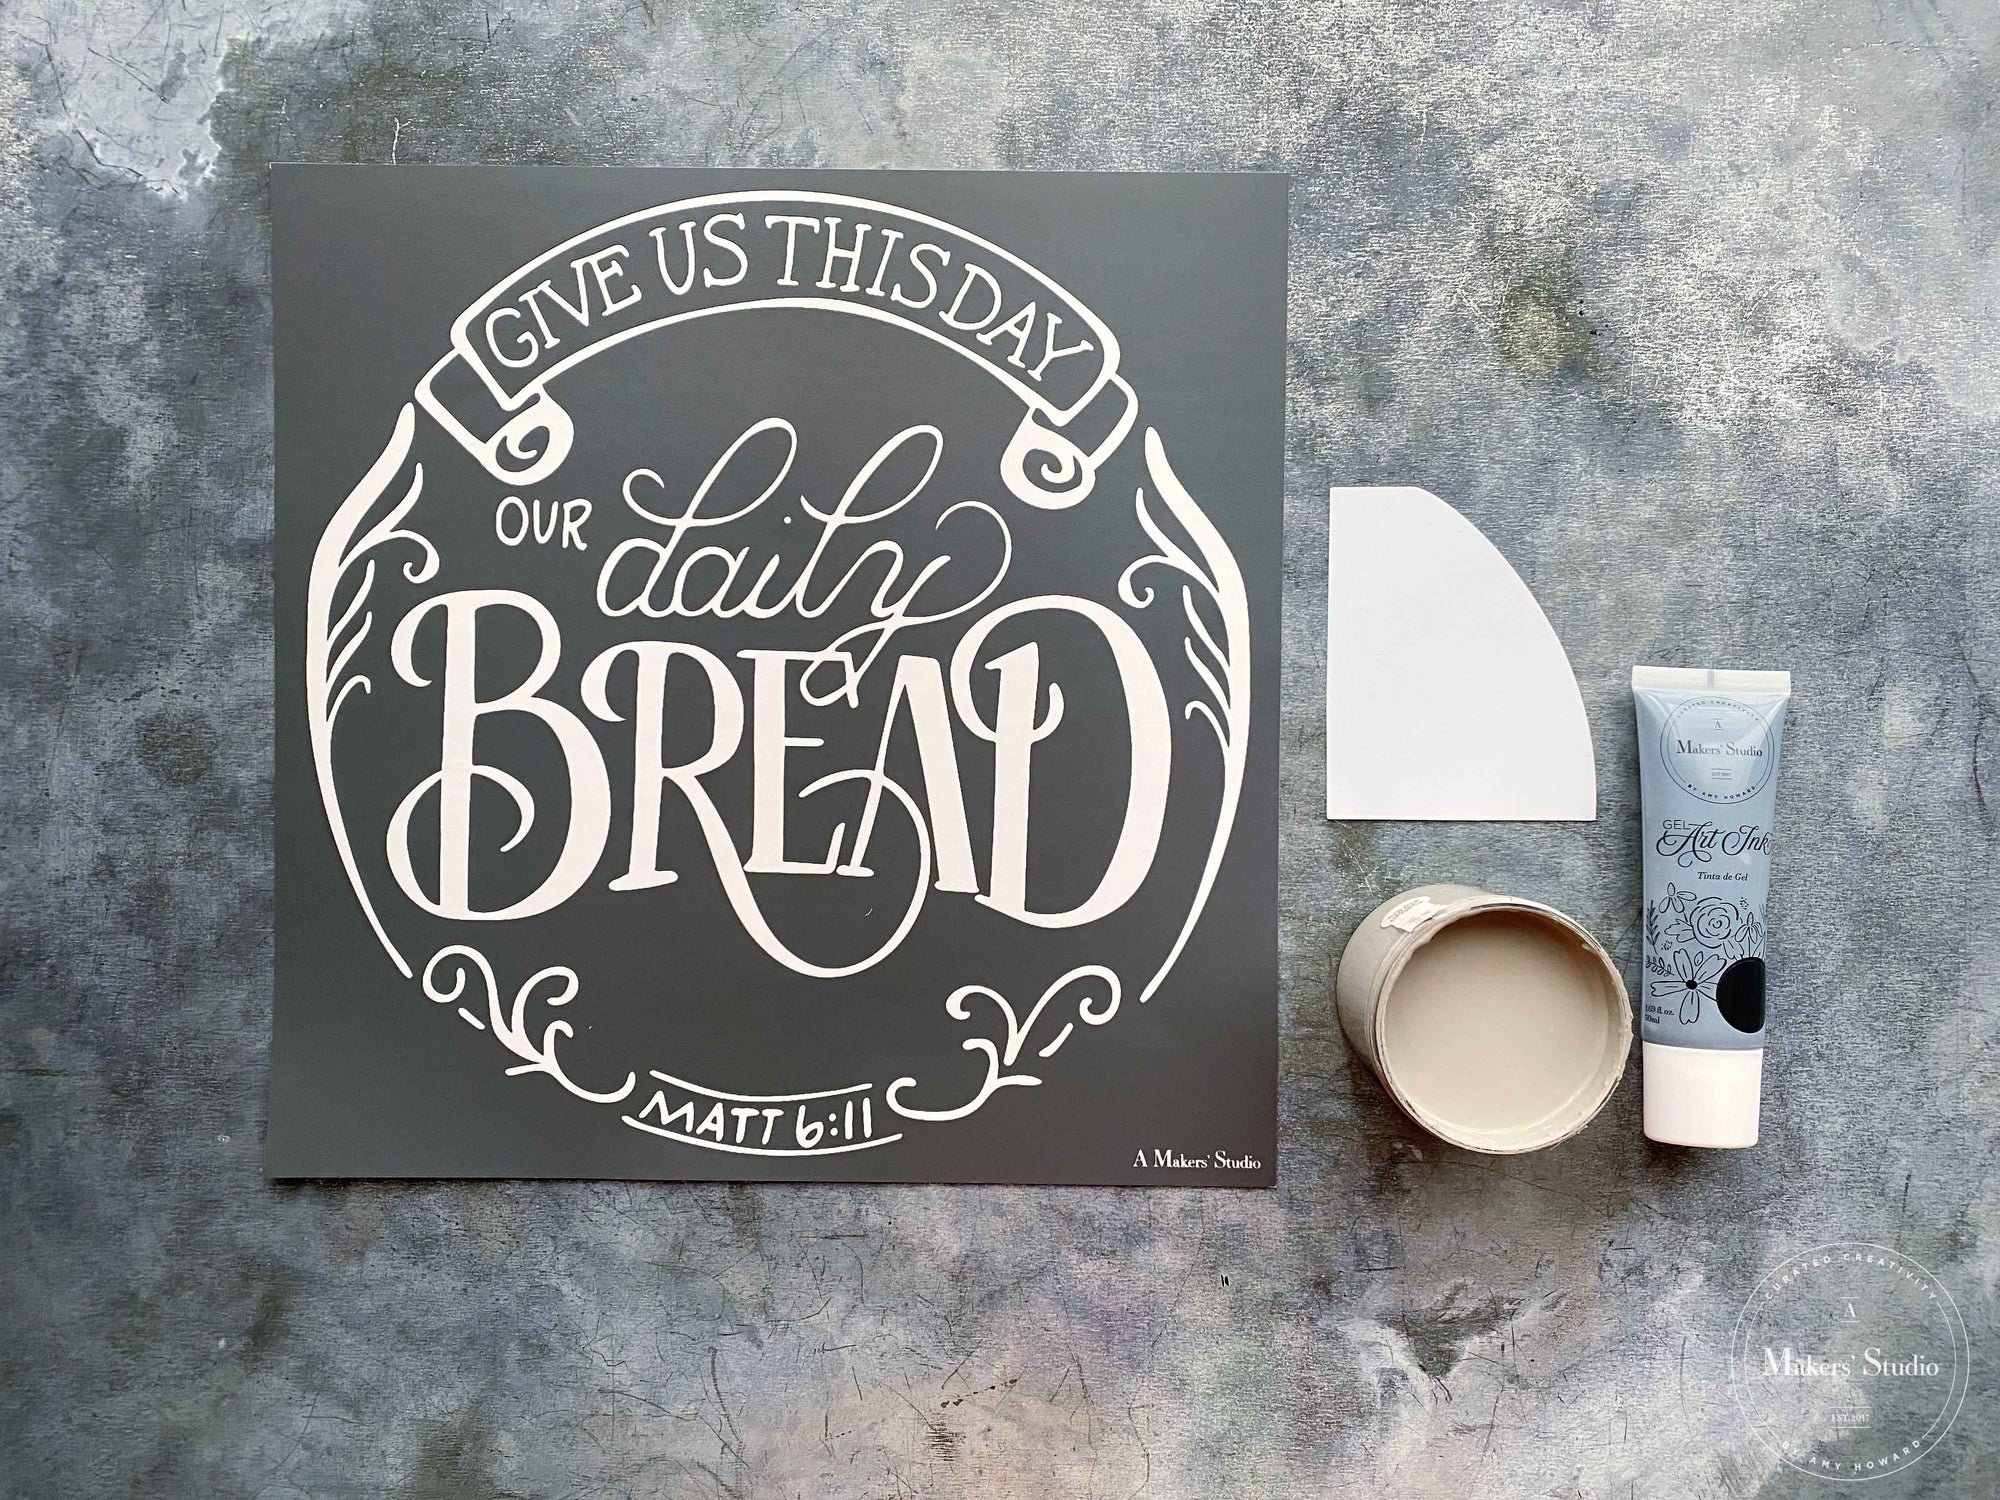 Daily Bread Wall Hanging Project